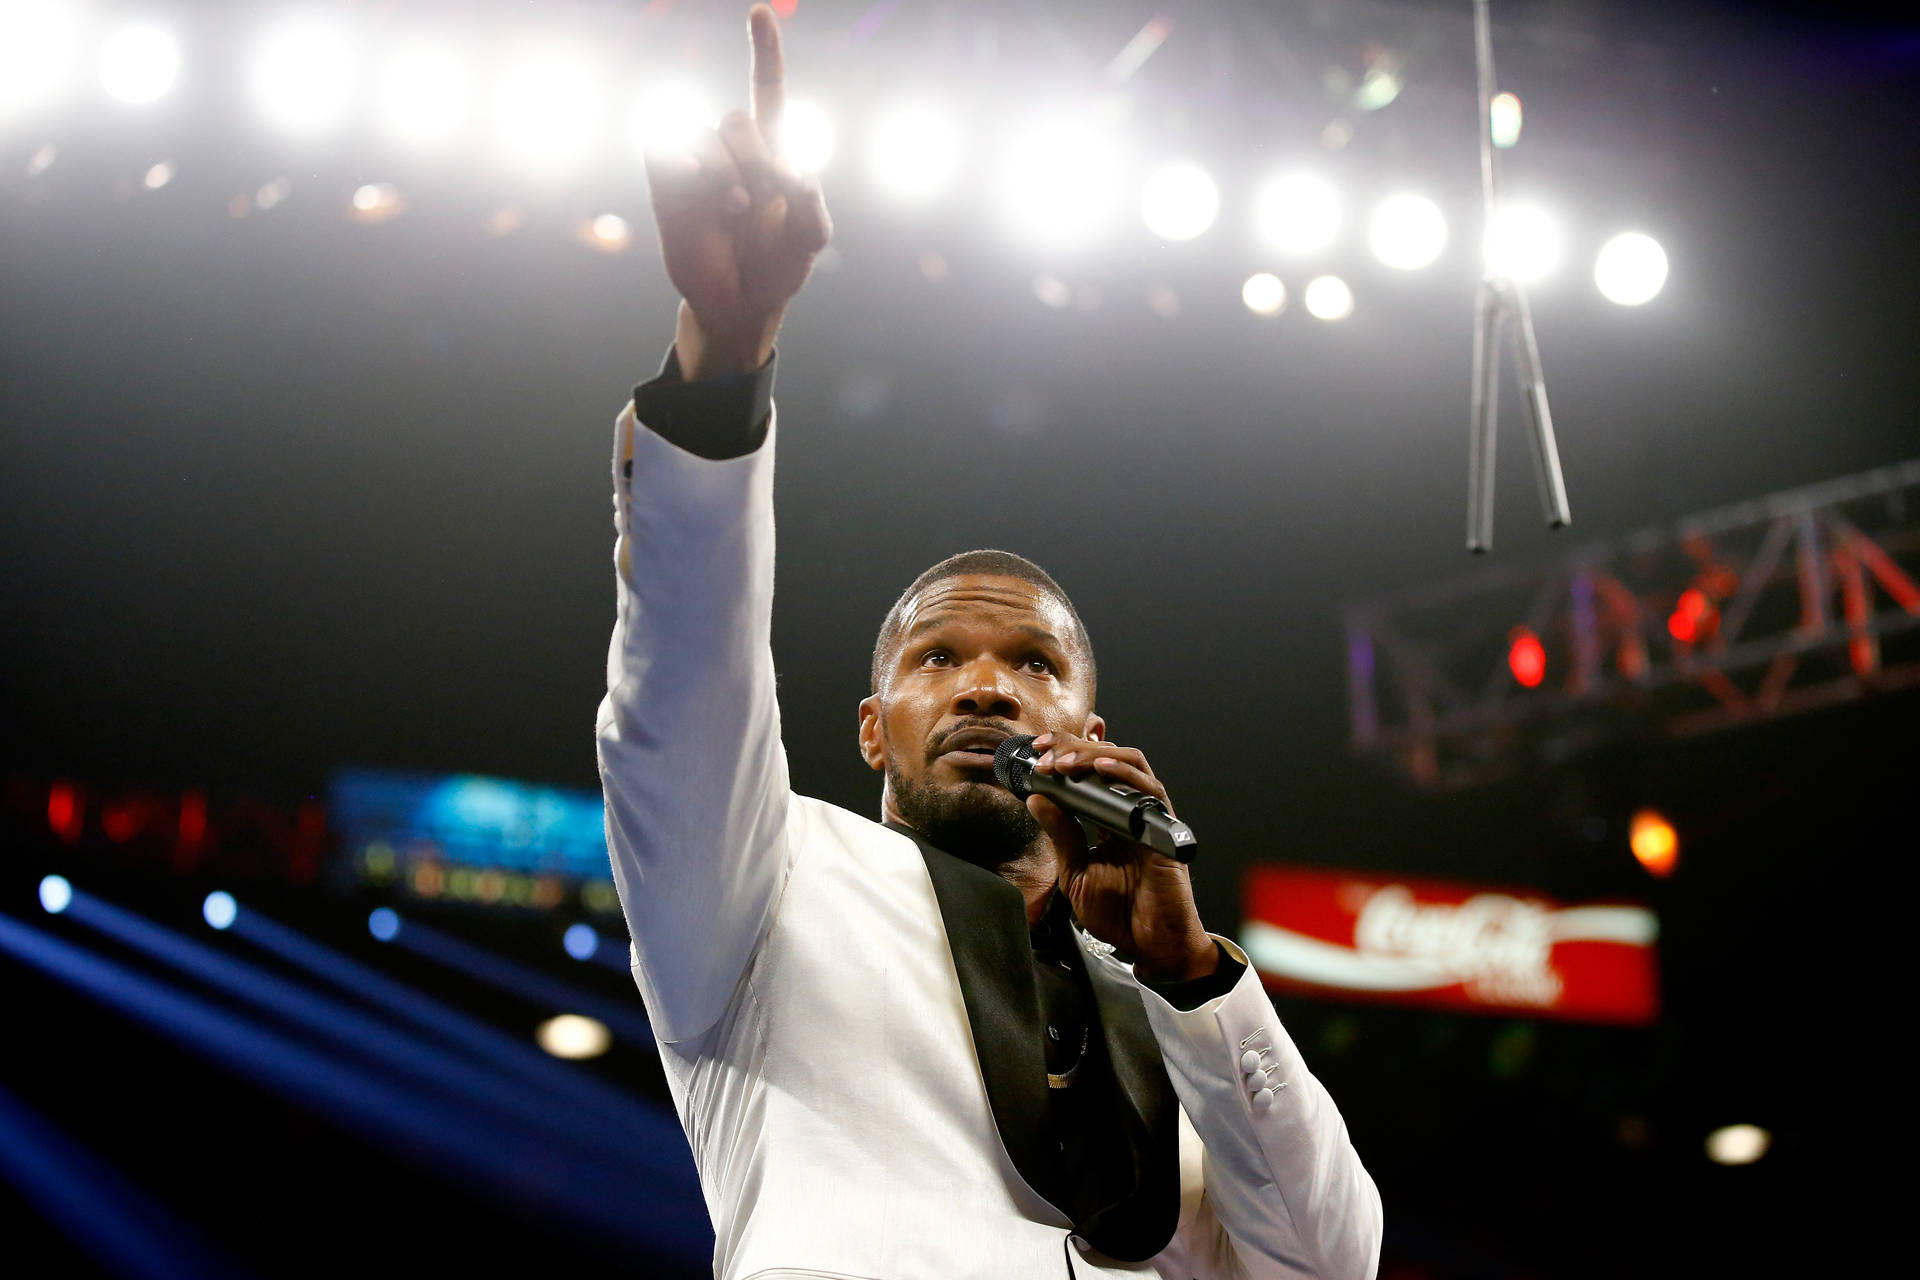 Actor Jamie Foxx smiles while attending the Mayweather vs Pacquiao boxing match Wallpaper